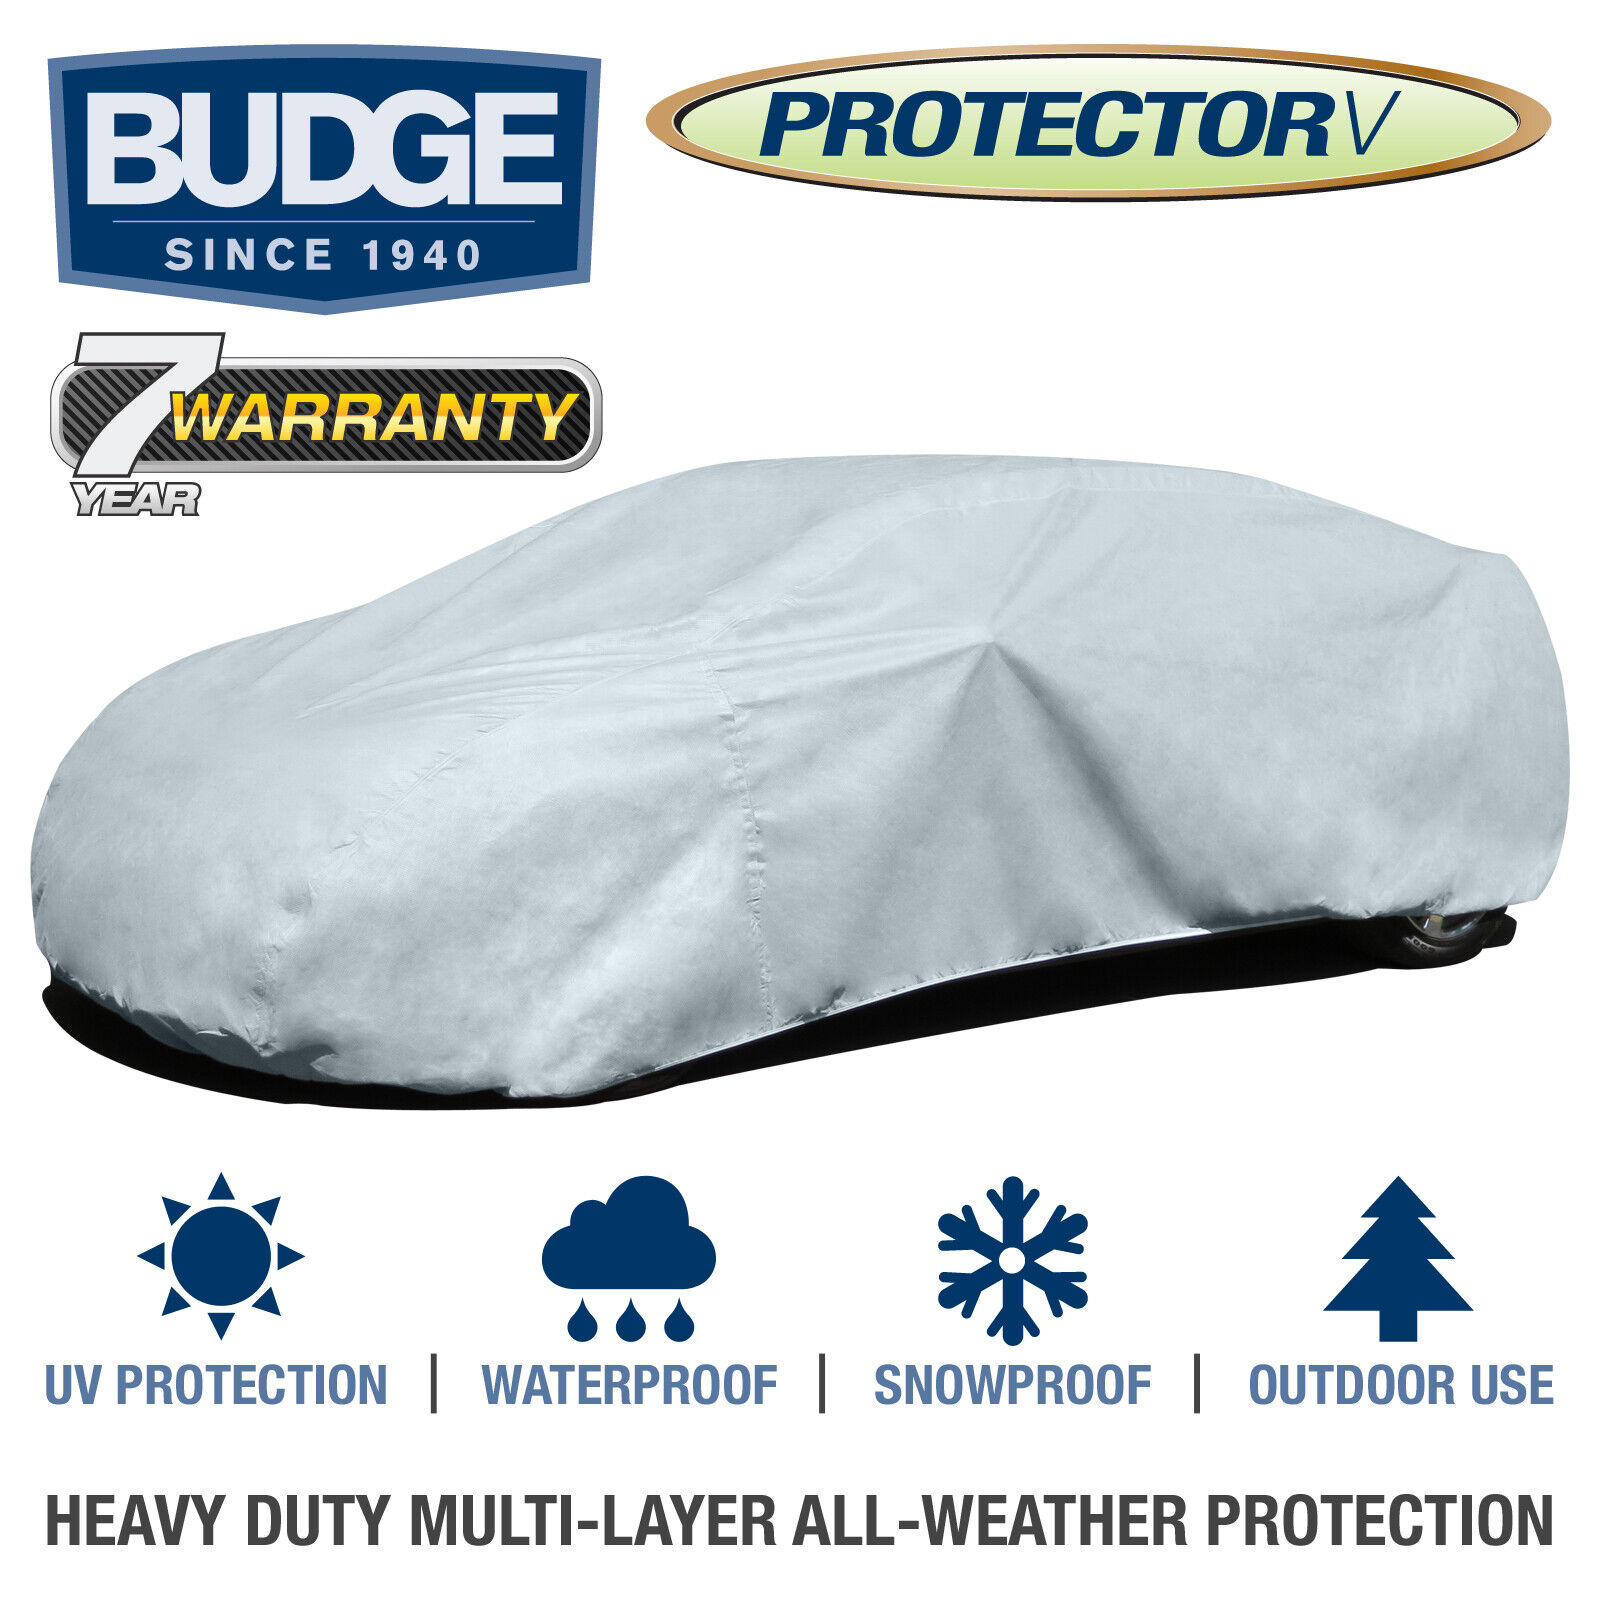 Budge Protector V Car Cover Fits Cars up to 13\'1\